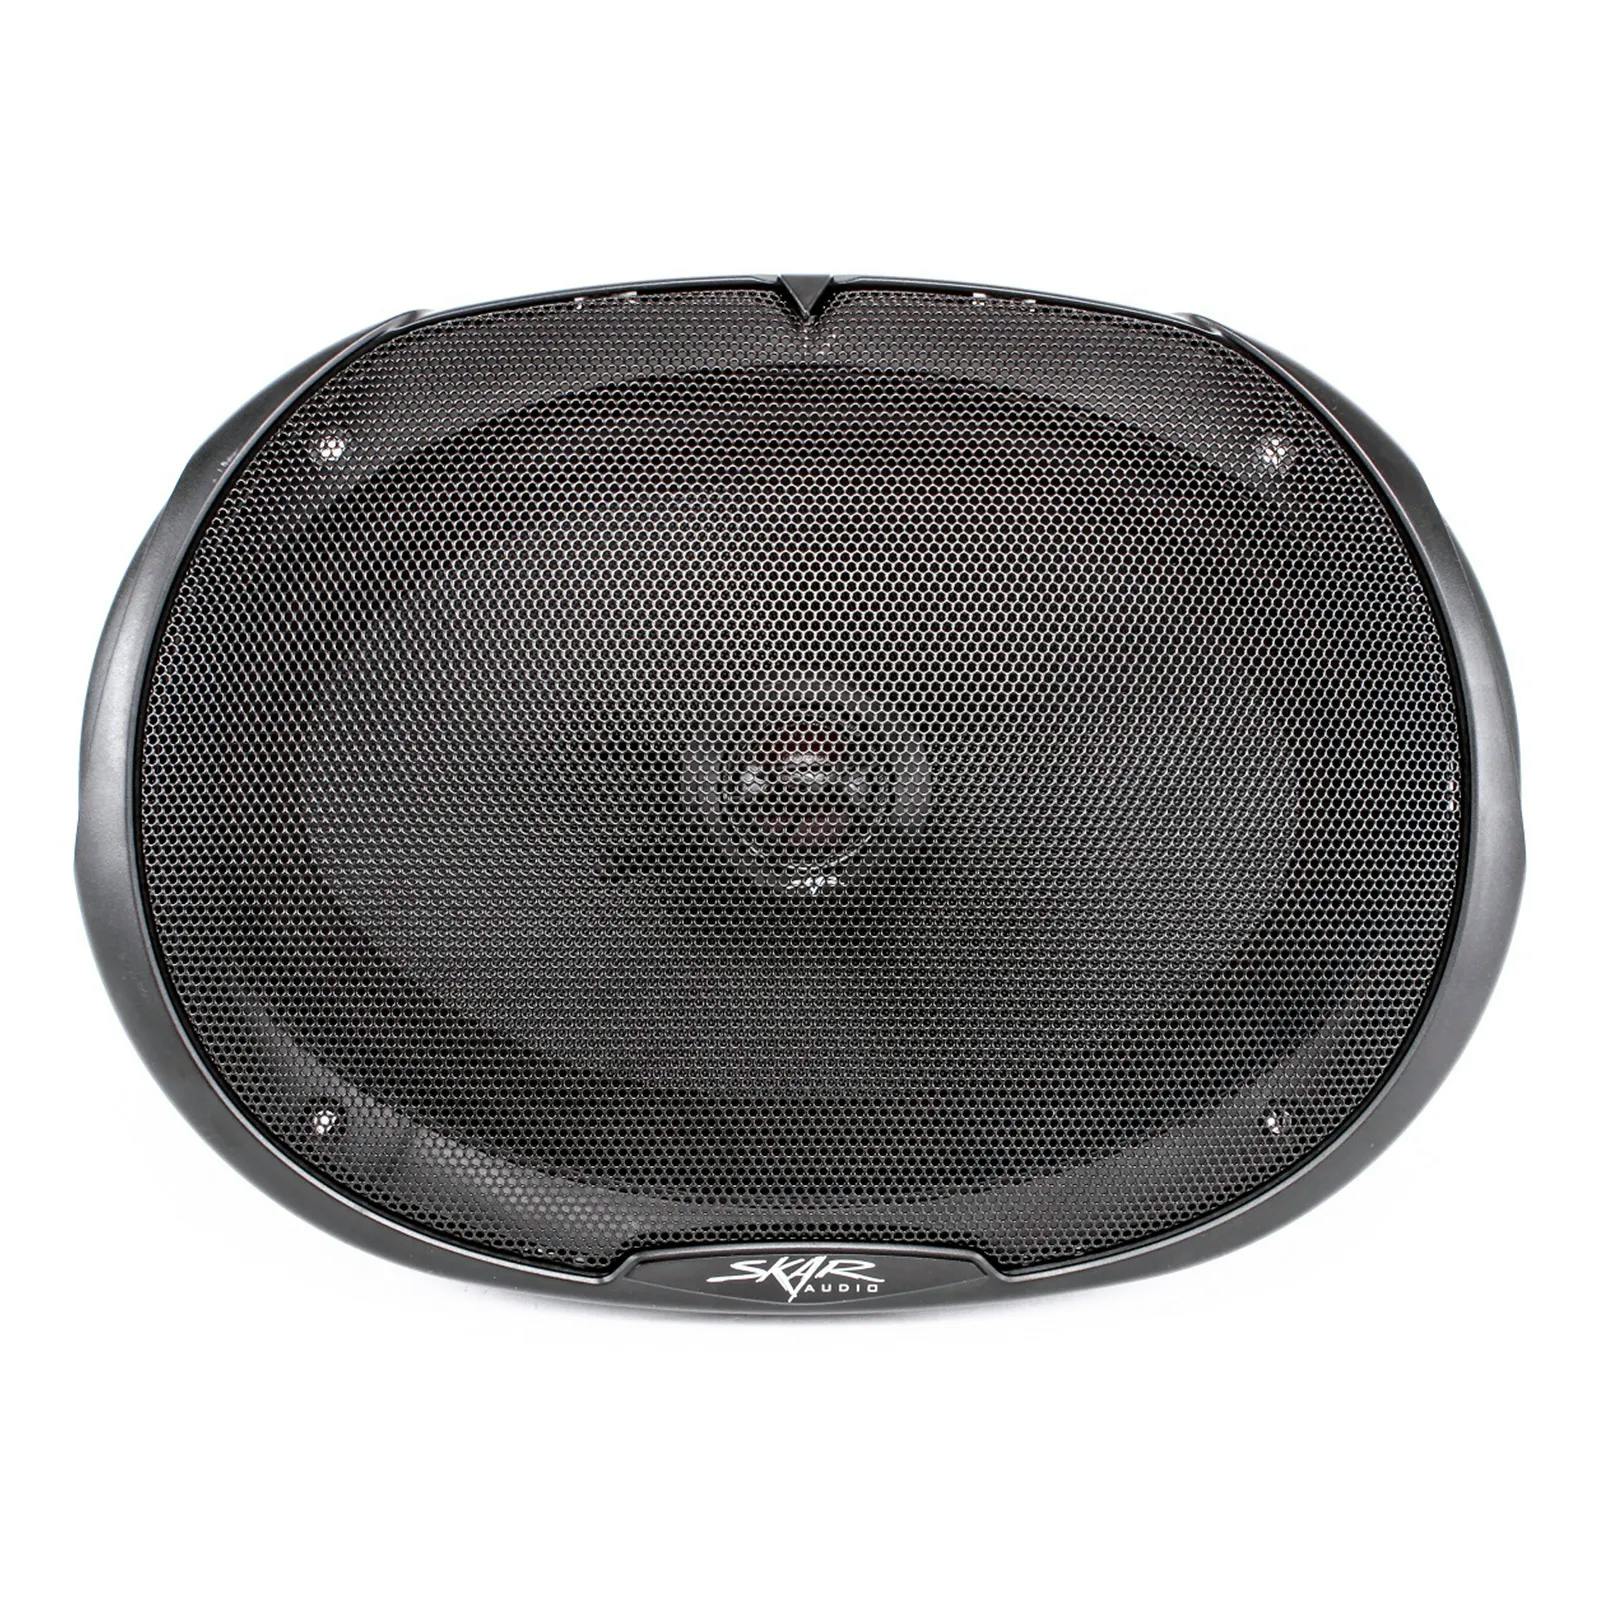 Featured Product Photo 5 for TX69 | 6" x 9" 240 Watt Elite Coaxial Car Speakers - Pair